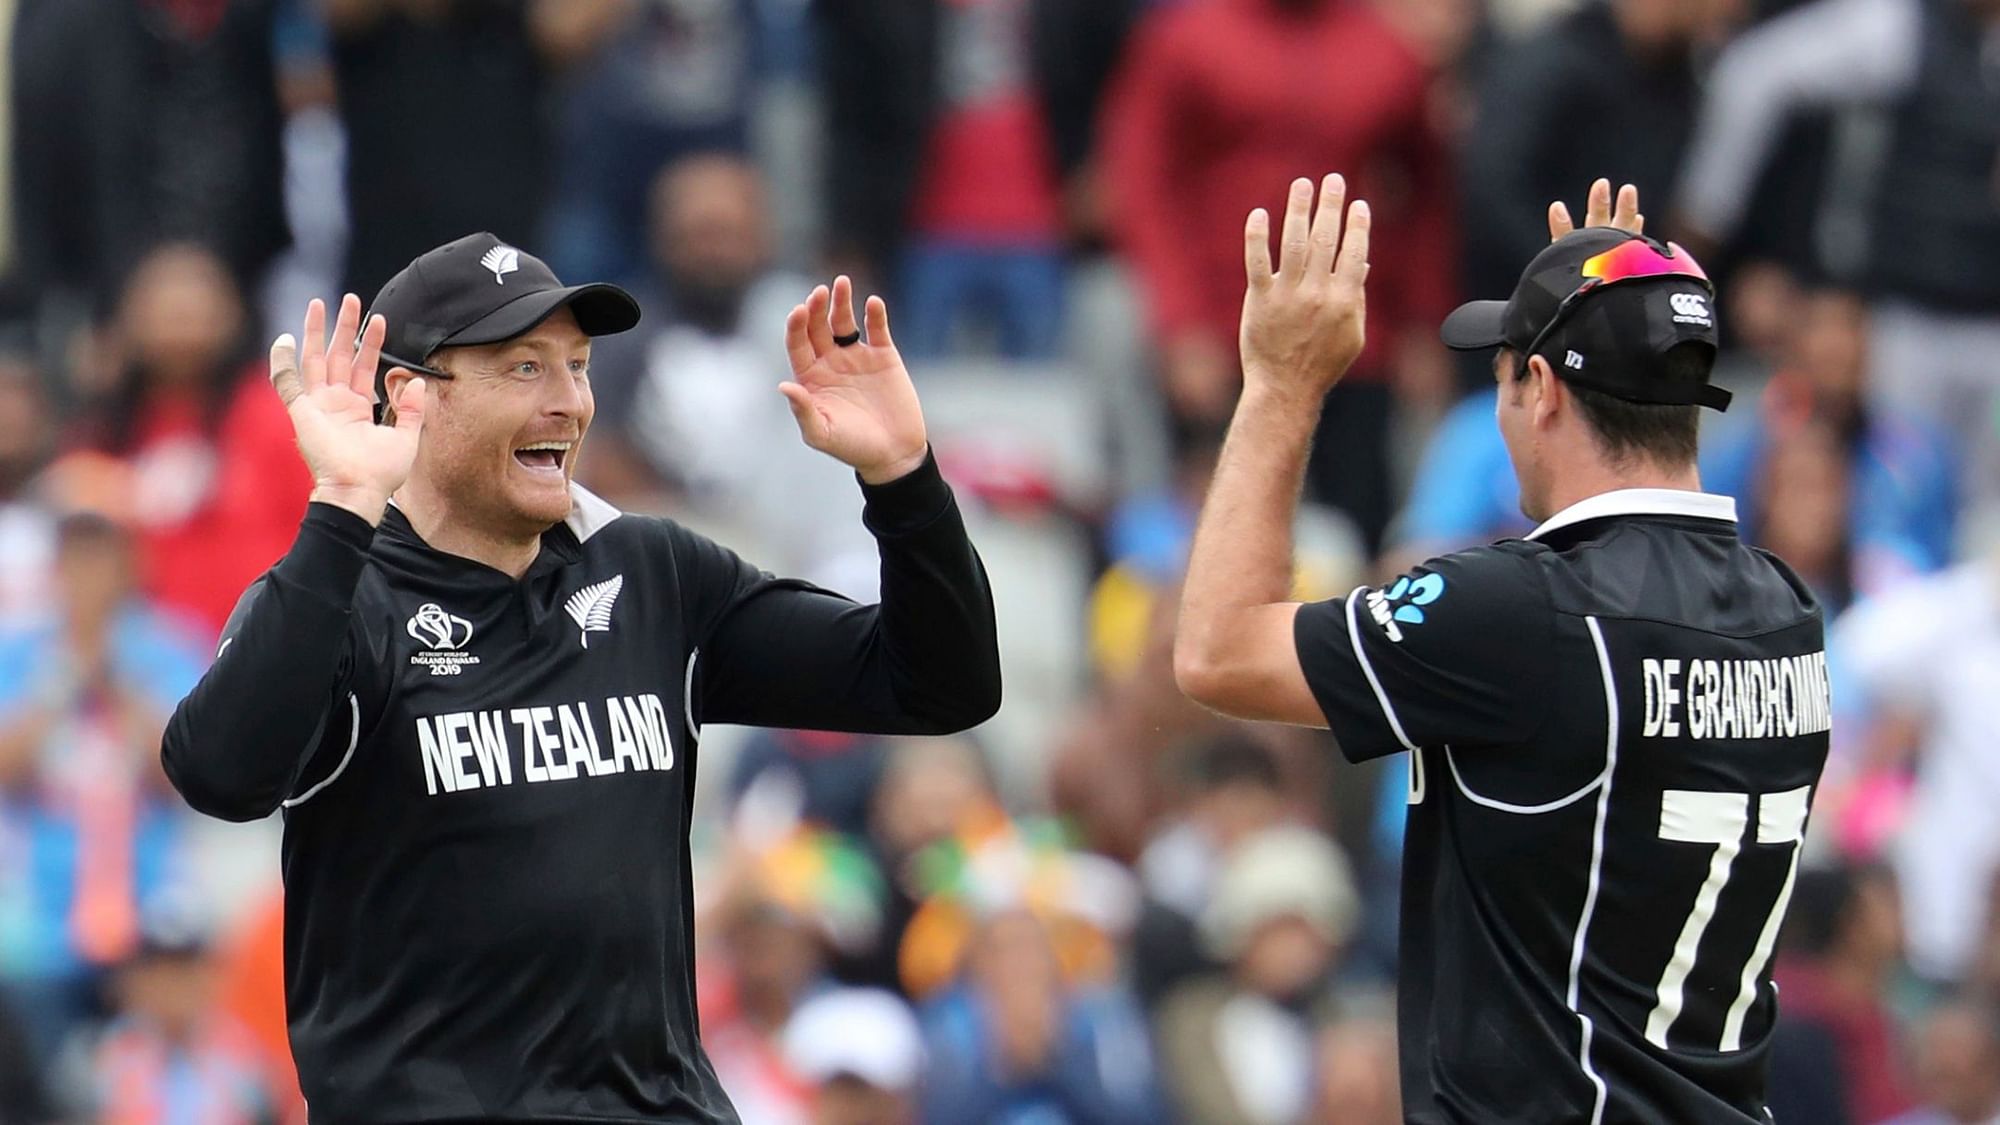 New Zealand opener Martin Guptill reacts to his game-changing run out of MS Dhoni in the World Cup semi-final.